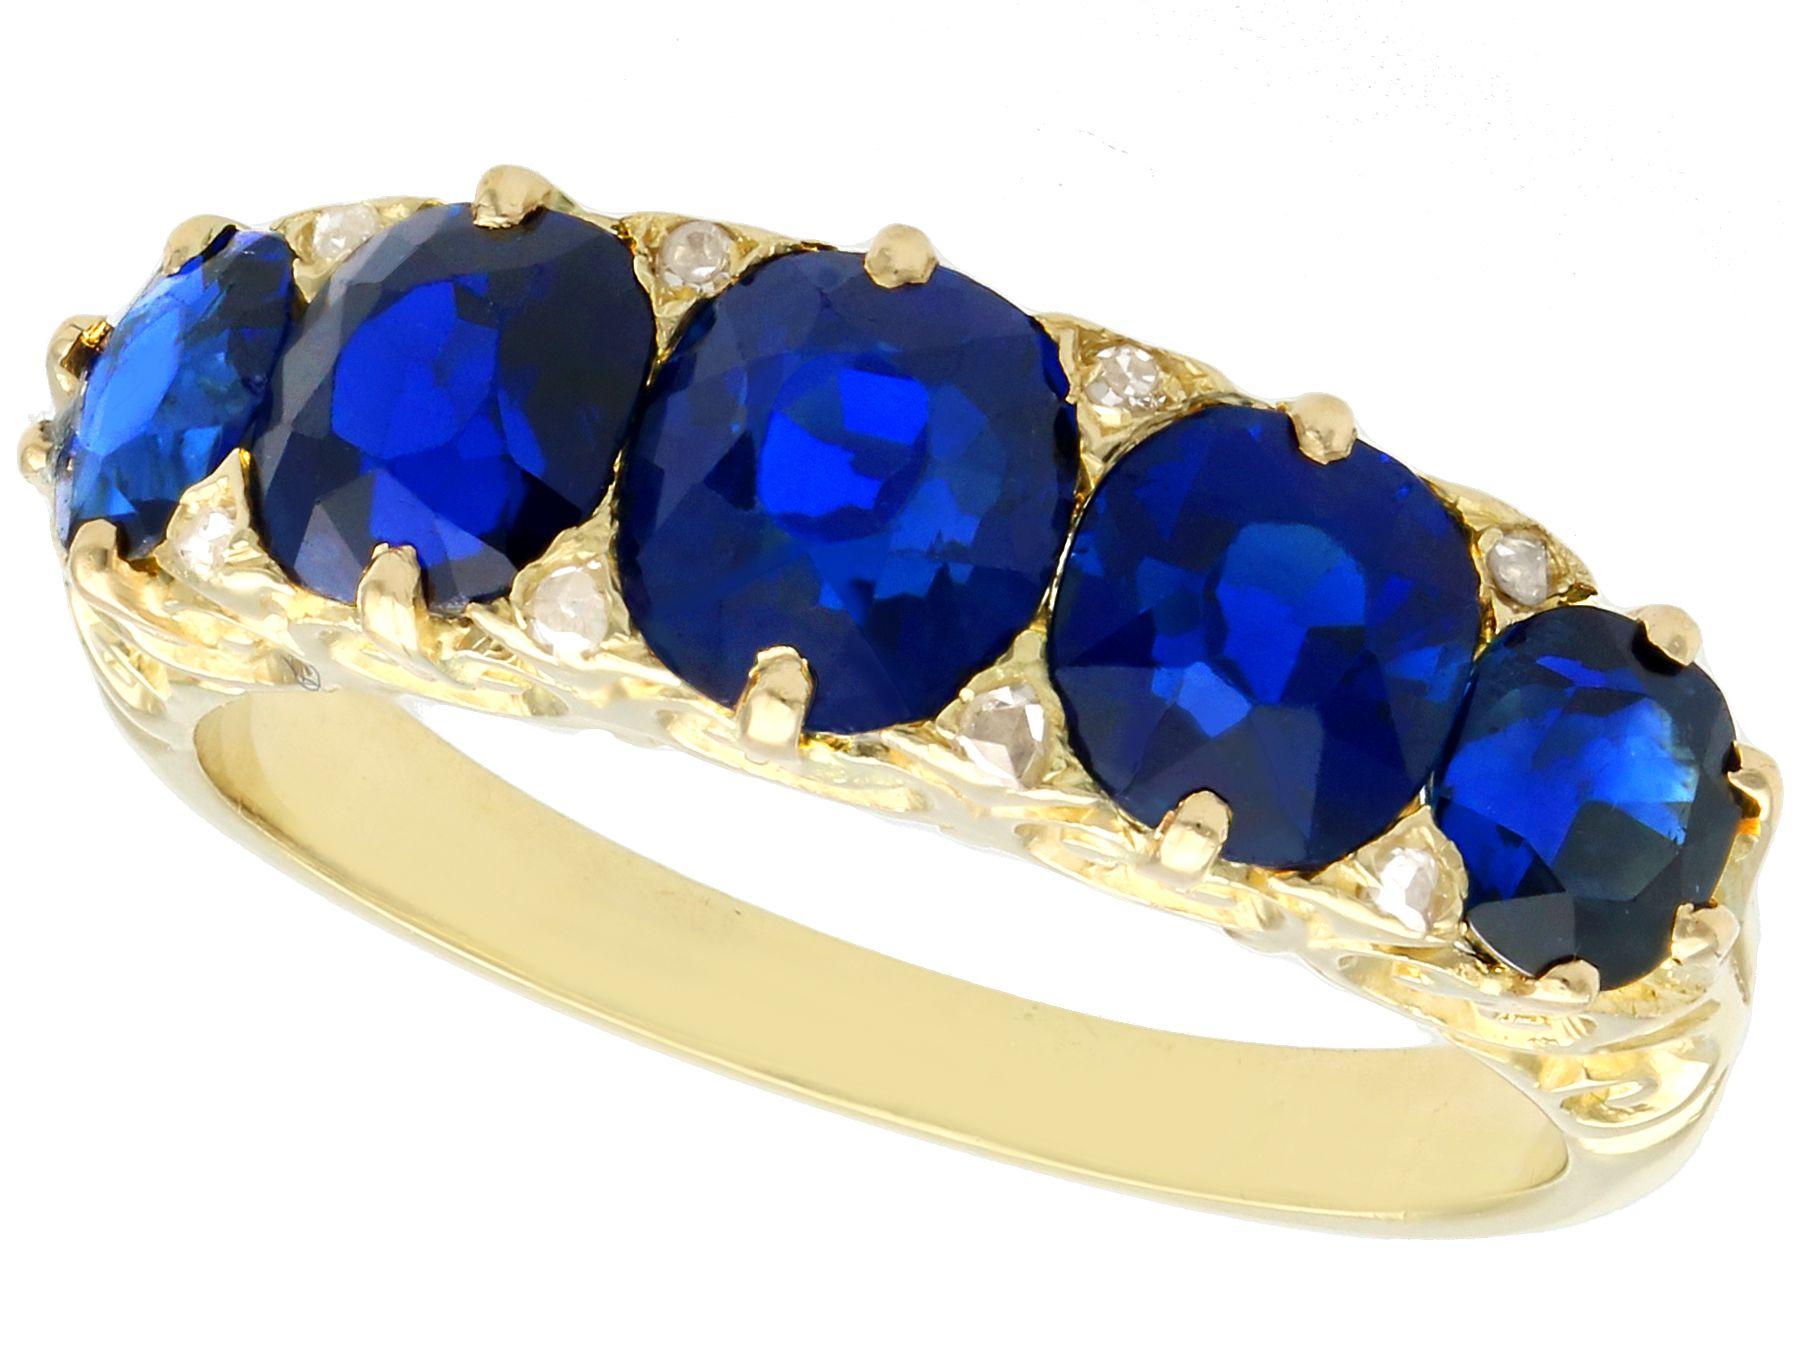 Edwardian Antique 3.15 Carat Basaltic Sapphire and Diamond Five Stone Ring in Yellow Gold For Sale